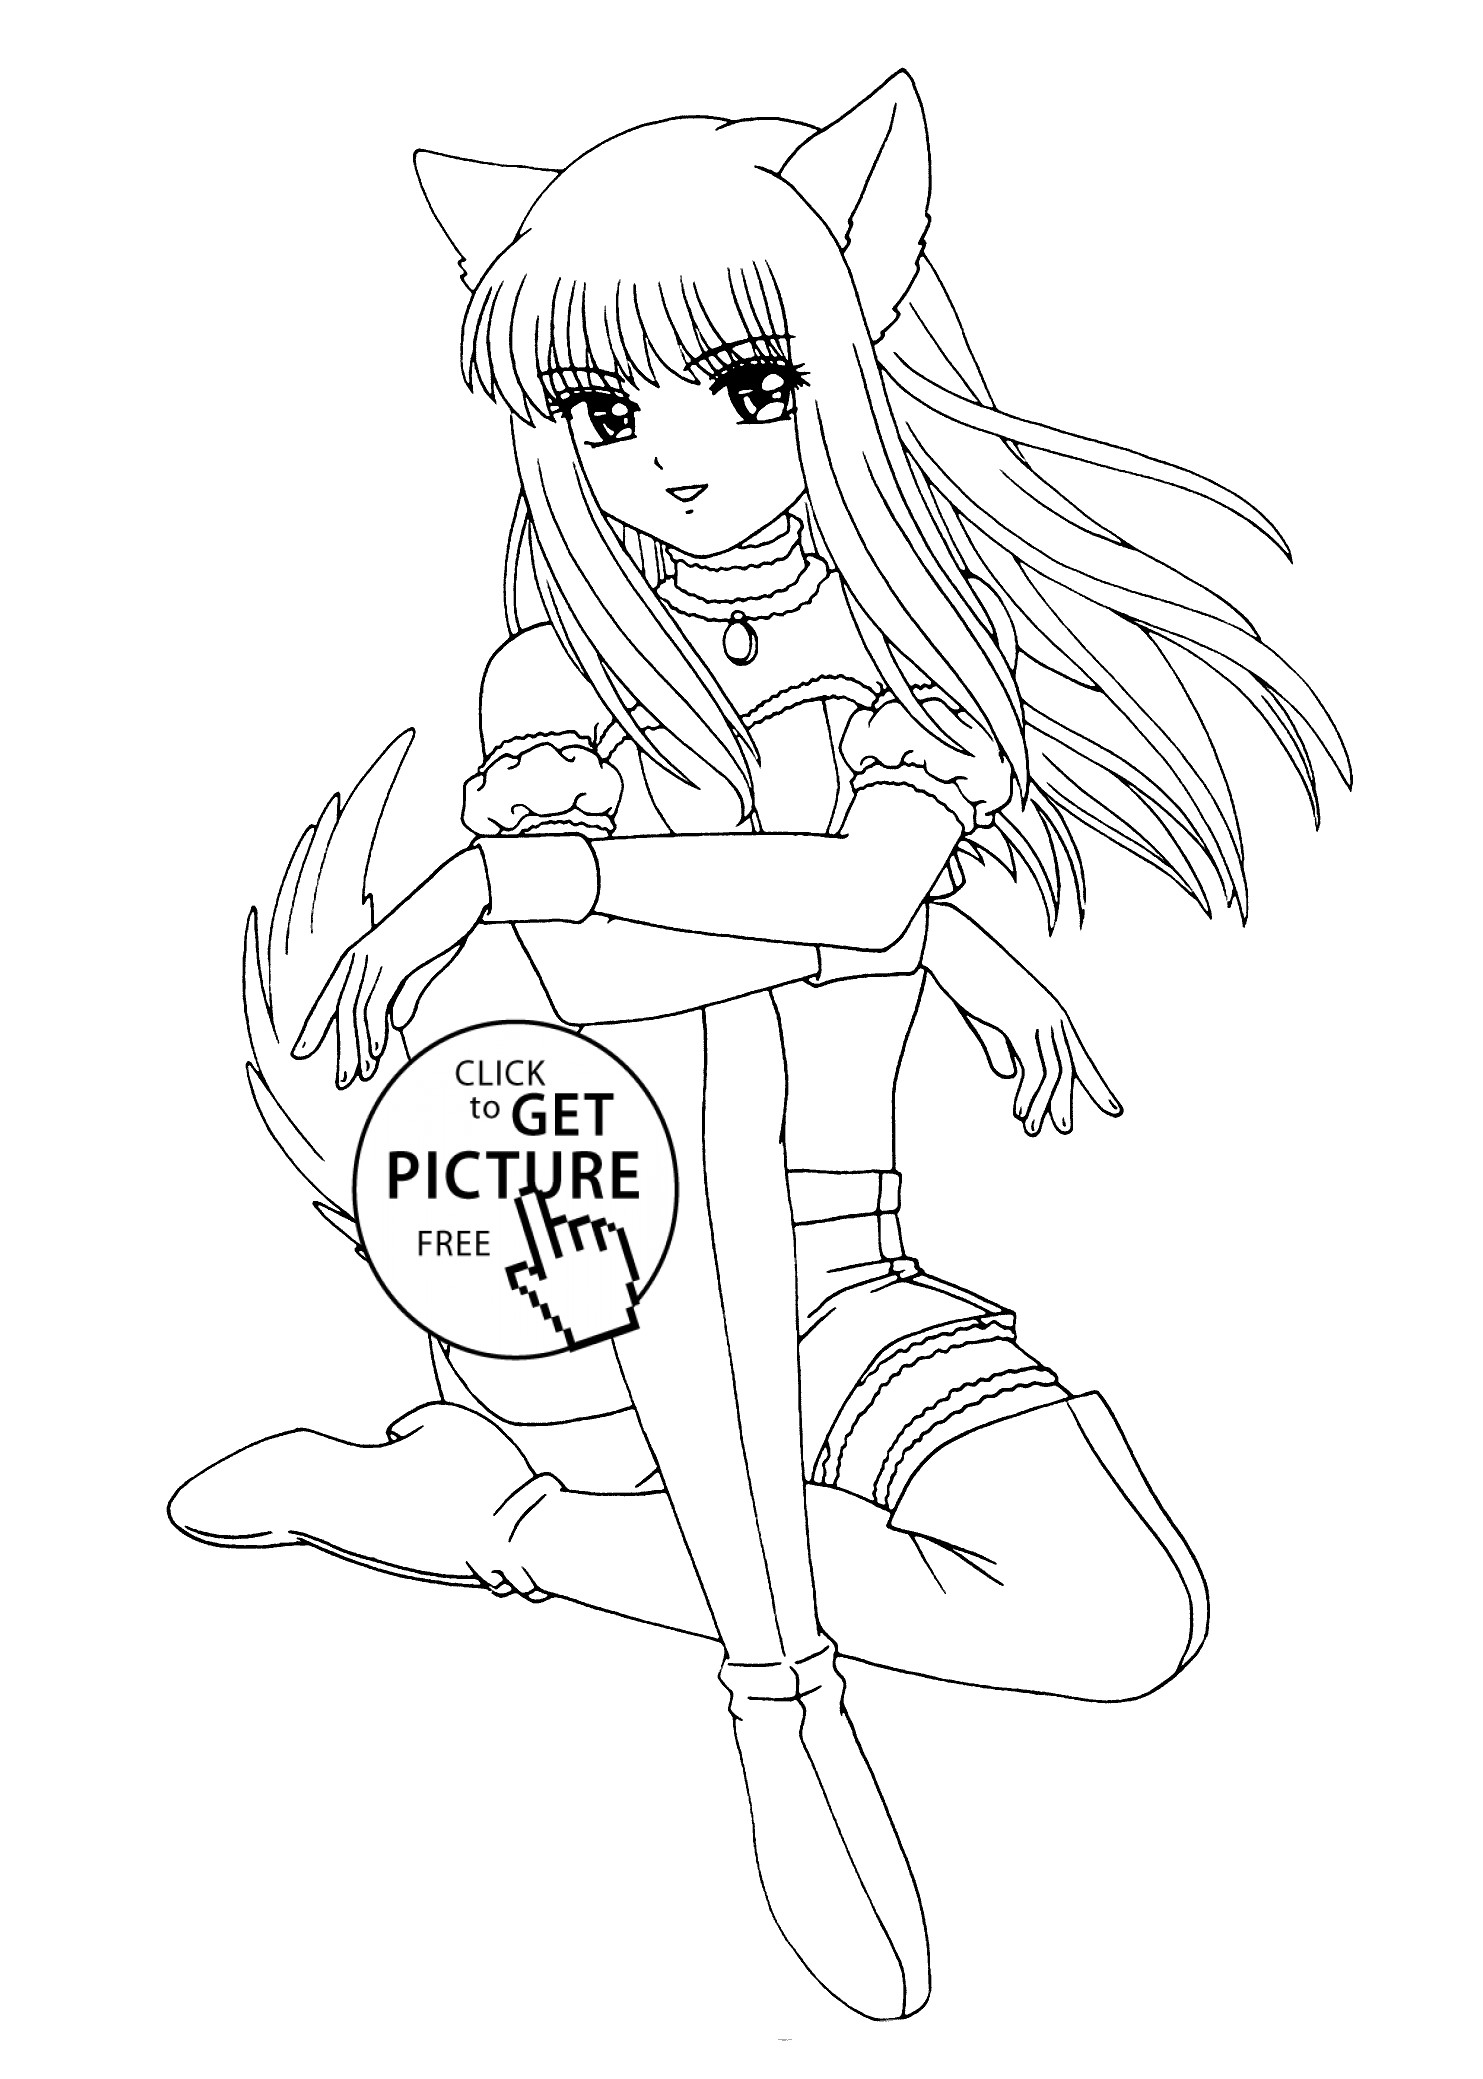 Manga Coloring Pages For Kids
 manga coloring pages for kids Archives Page 4 of 6